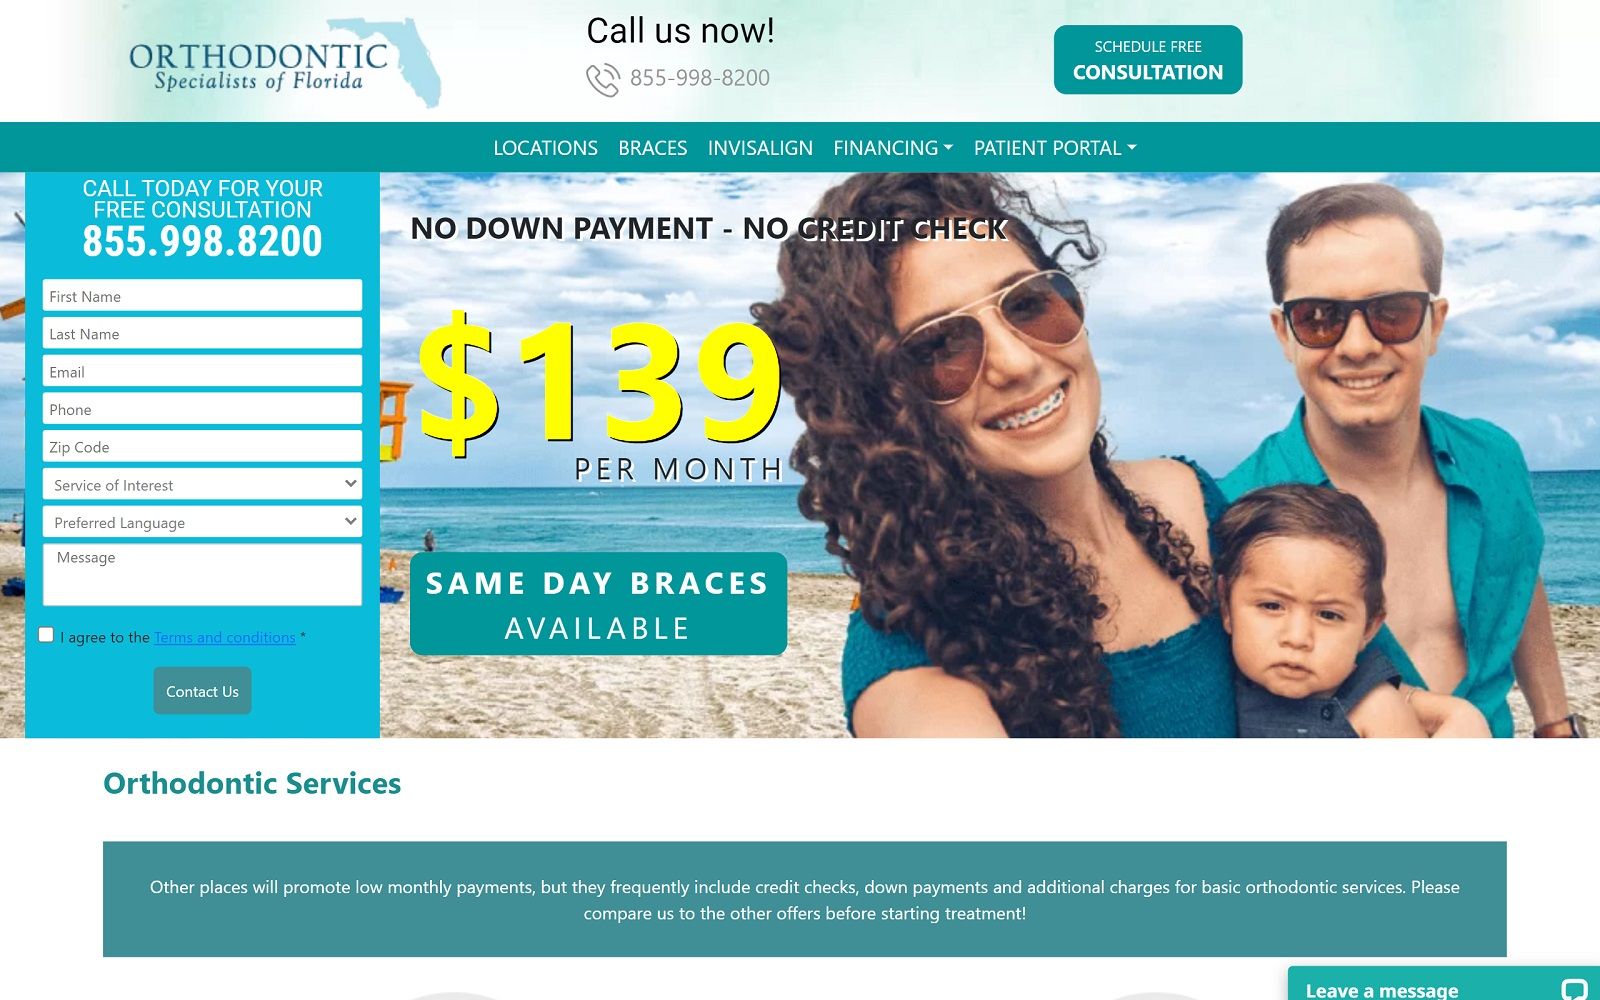 The screenshot of orthodontic specialists of florida - fort lauderdale website